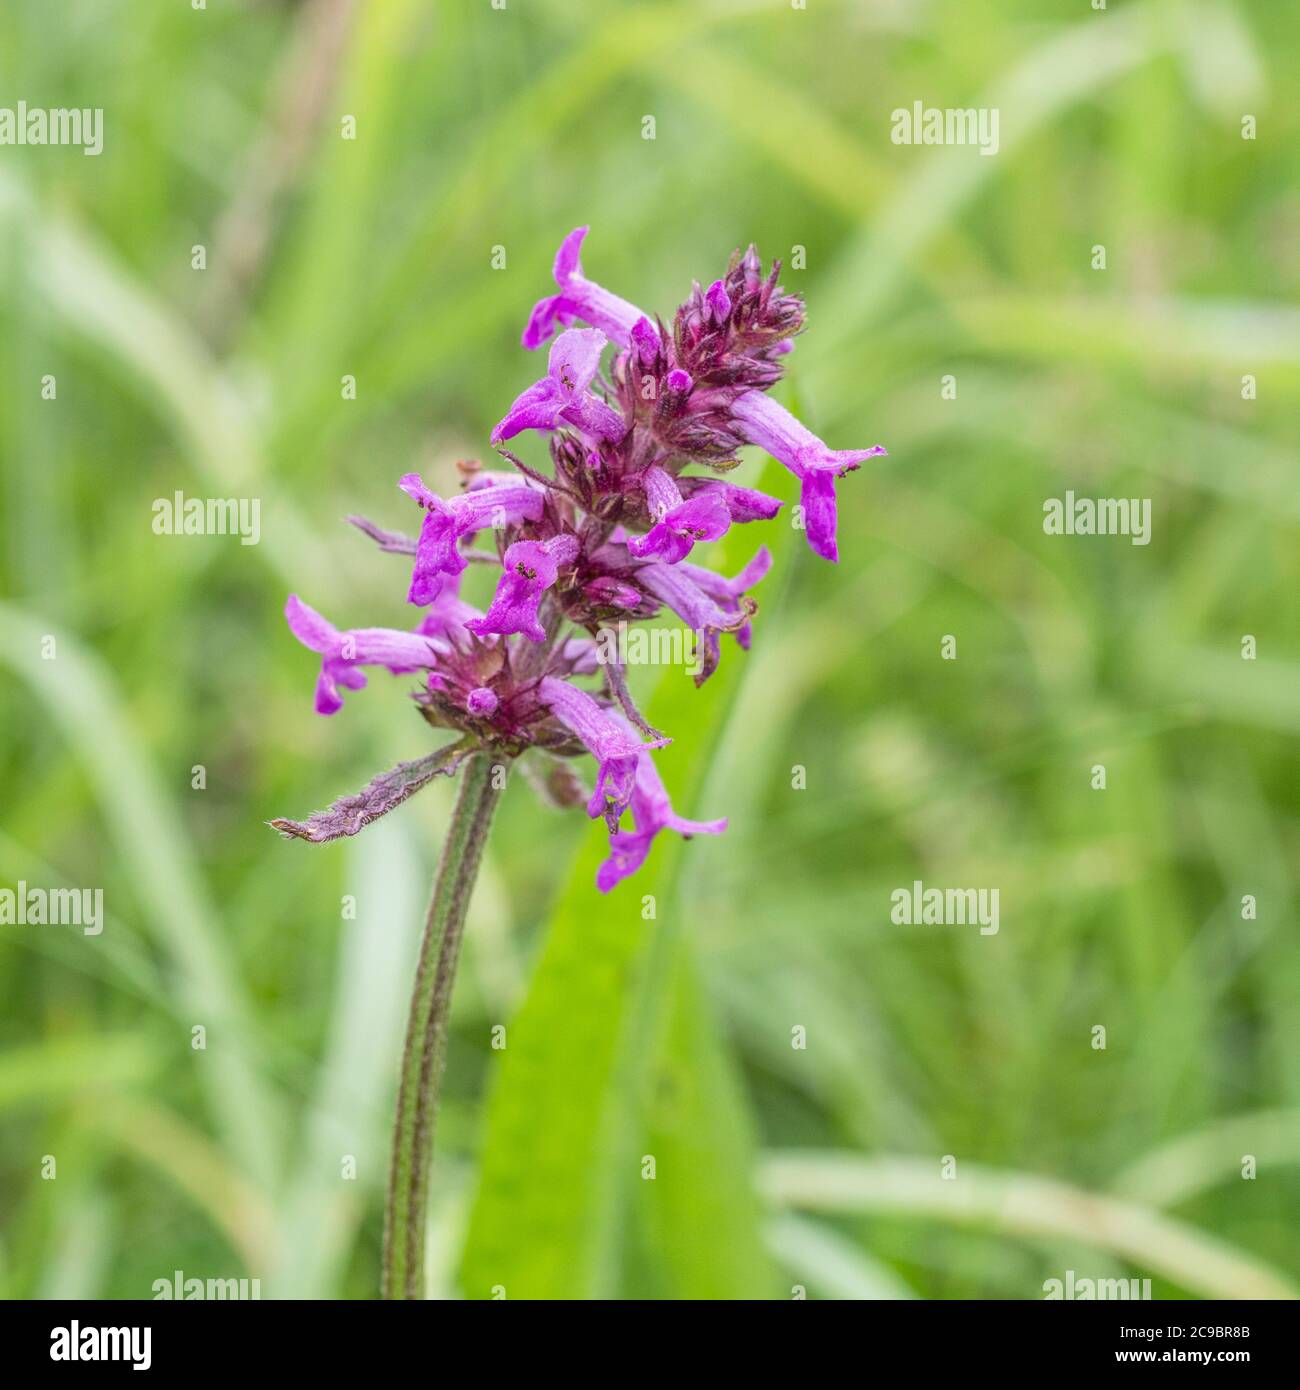 Purple flowers of Betony / Betonica officinalis. Former well-known medicinal plant used in herbal remedies and quack medicine. Stock Photo